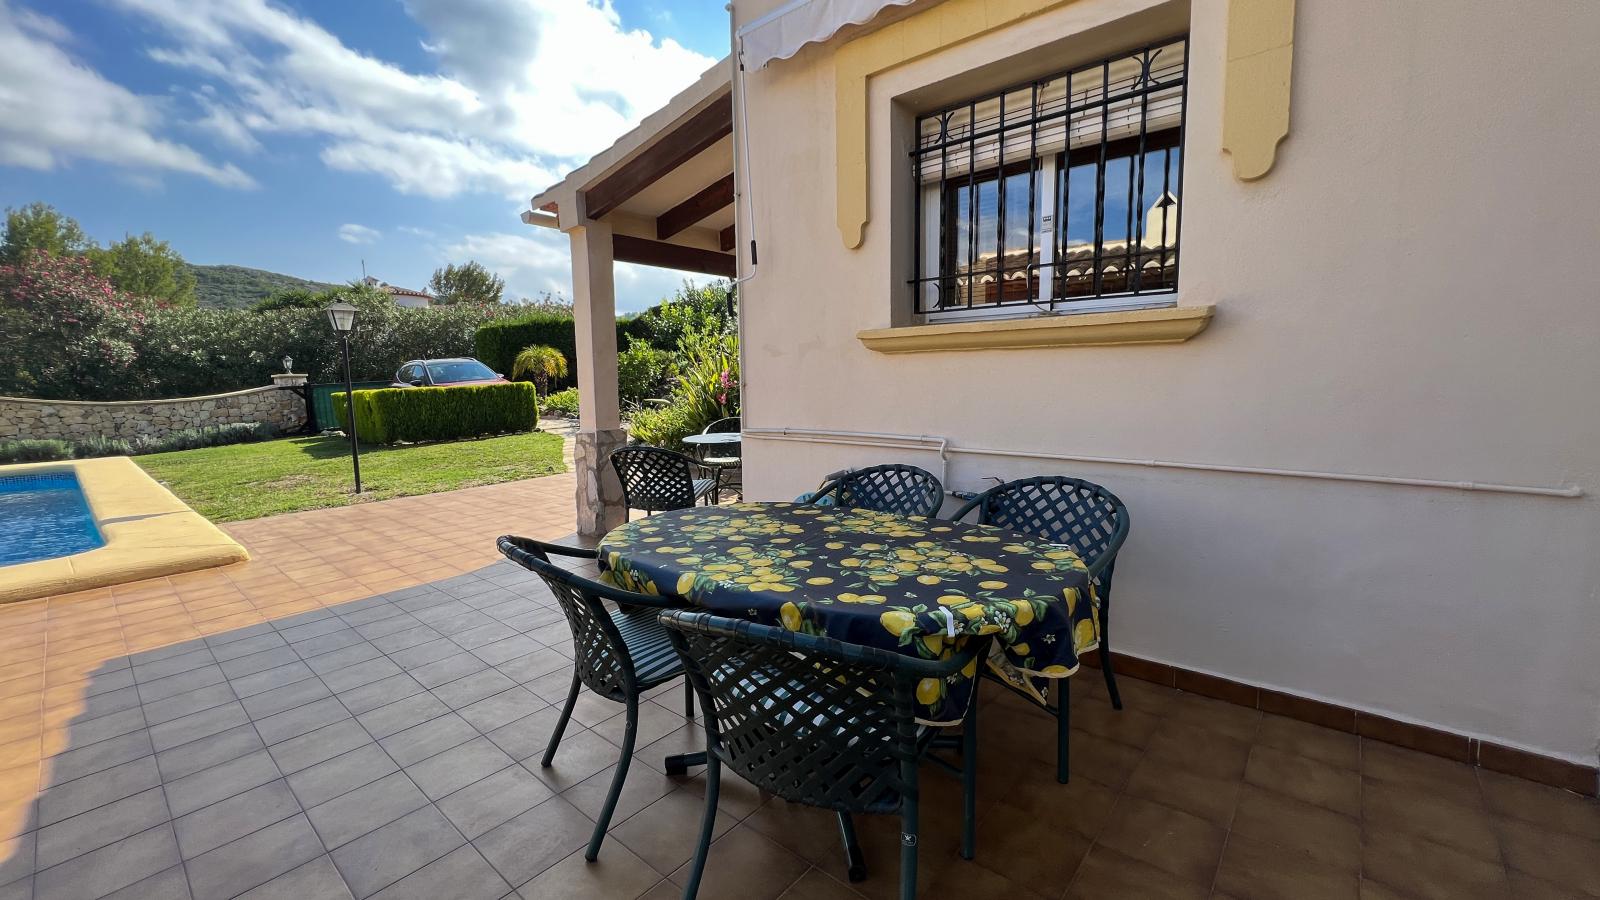 Large, Mediterranean family villa with pool and 3 bedrooms, in a quiet residential area of Rafol de Almunia.